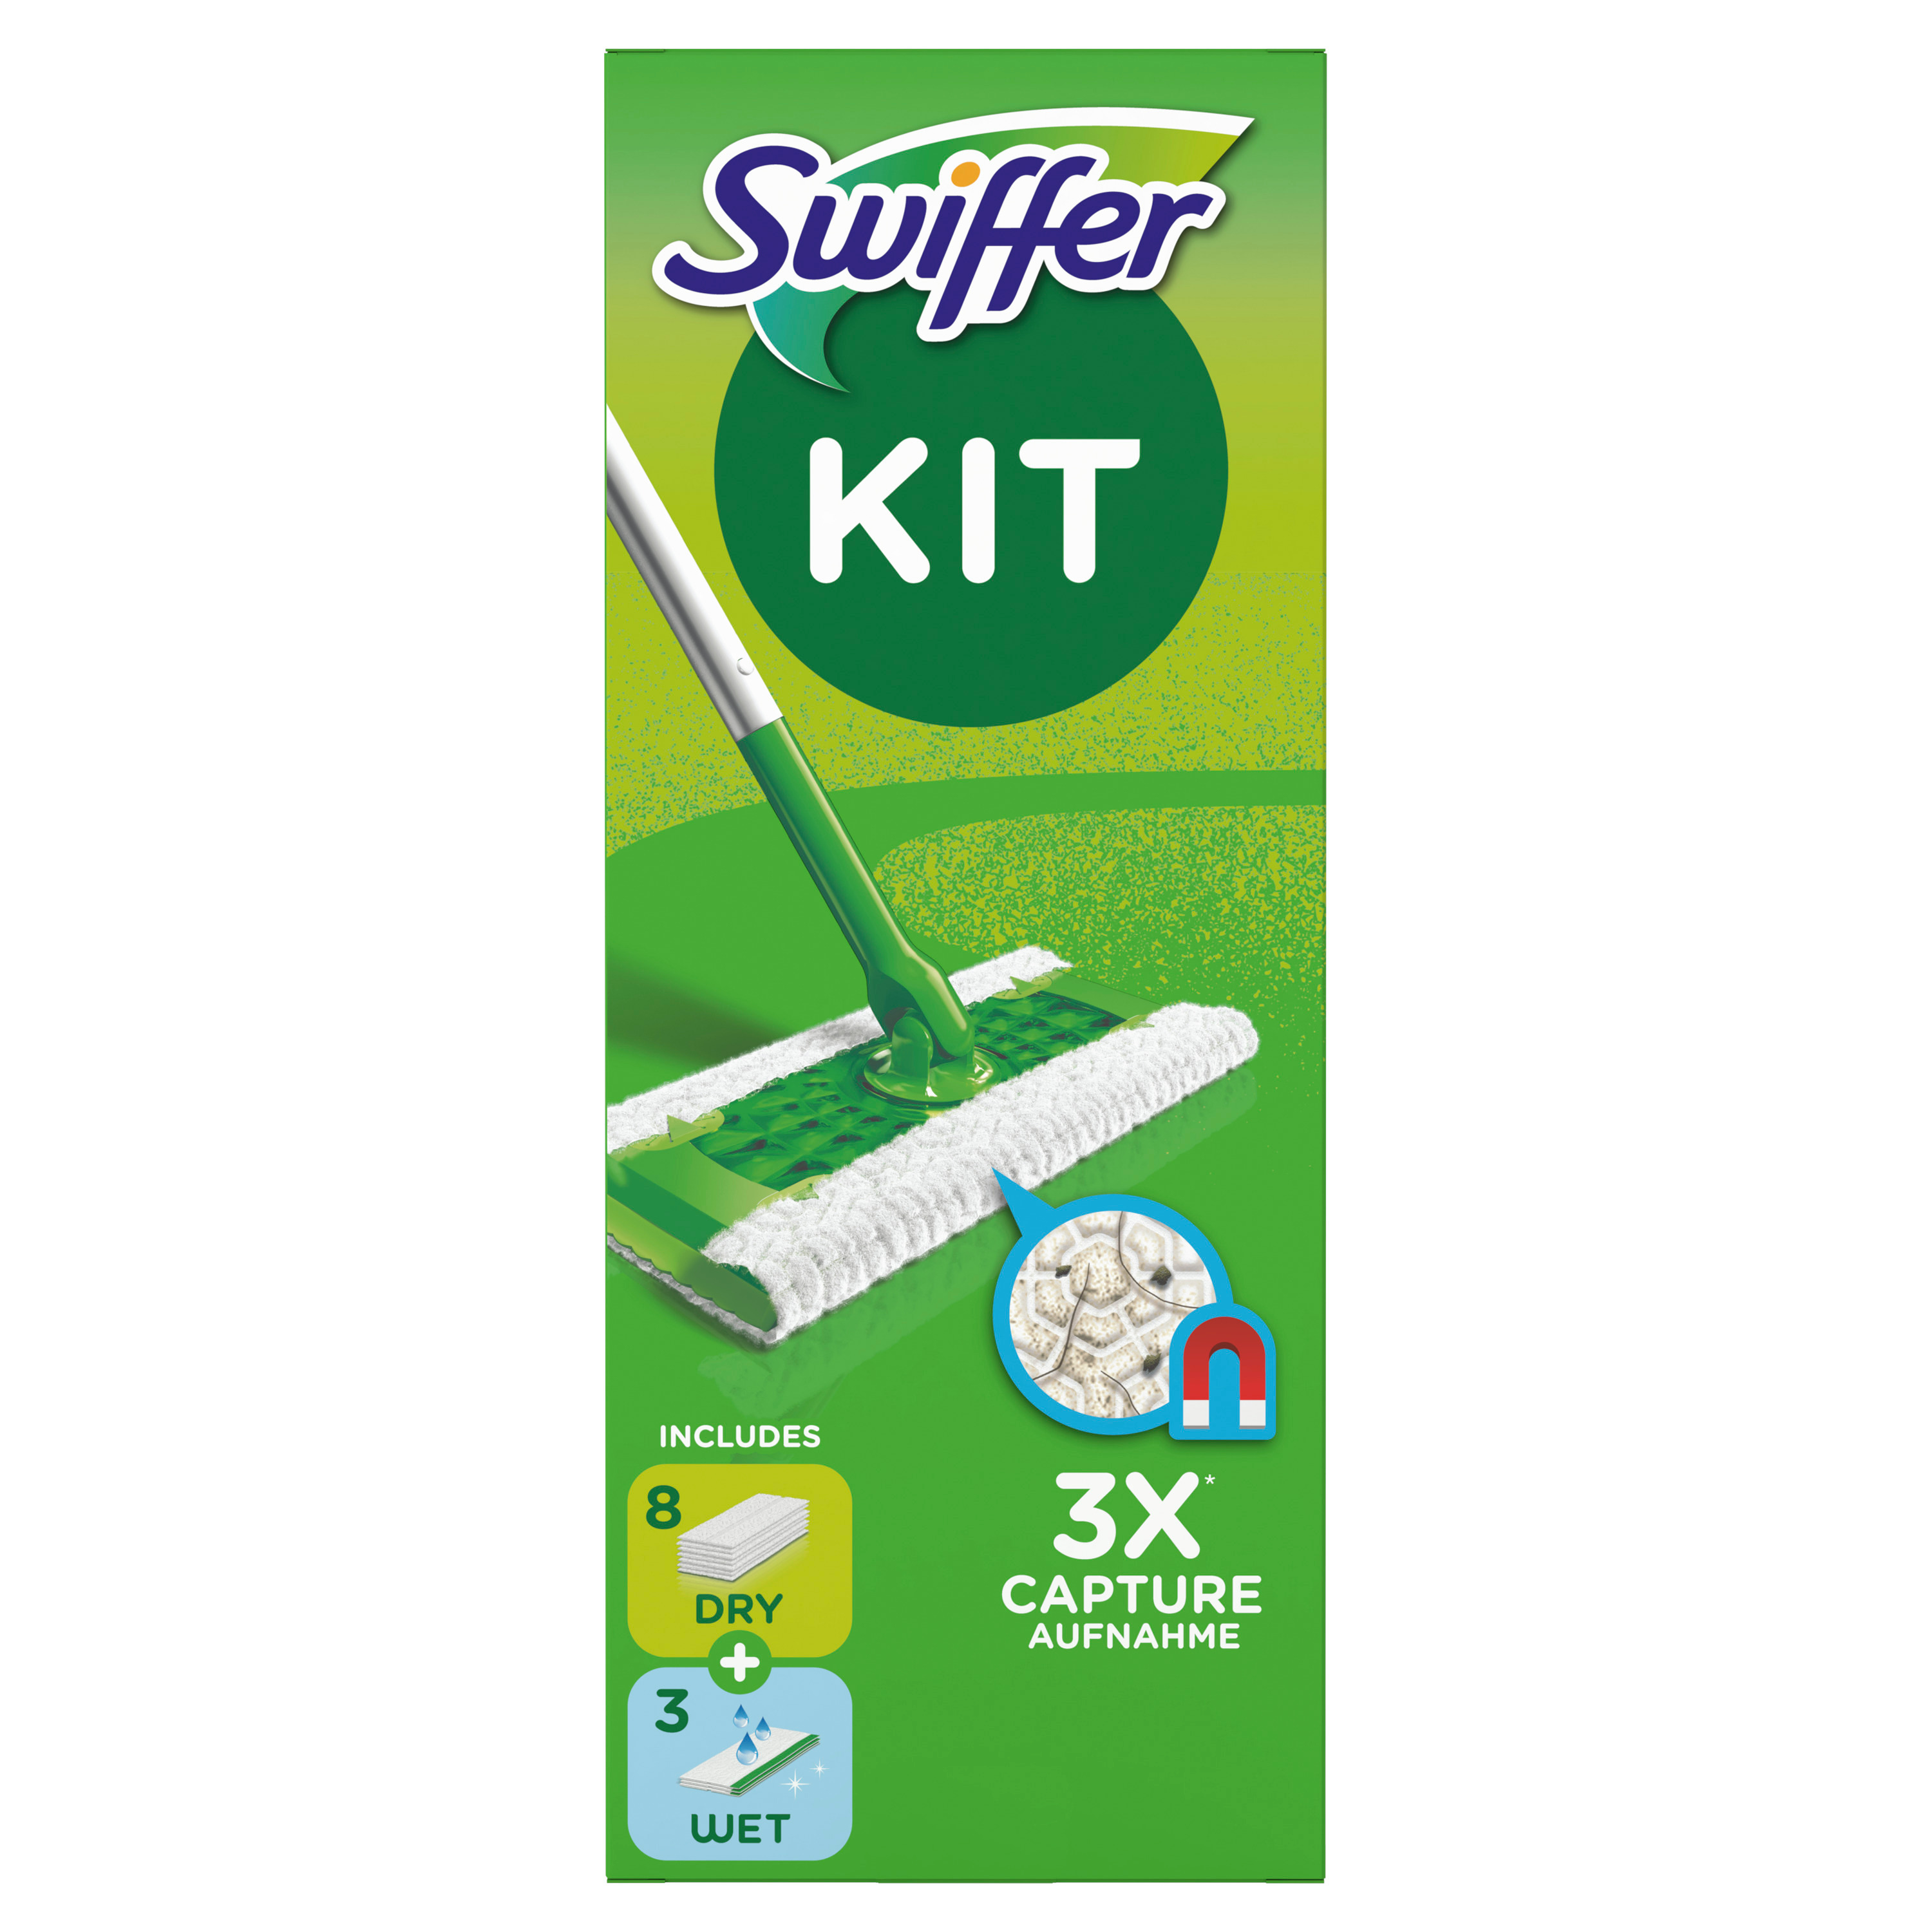 SWIFFER Kit Complet Balai 970706 ling. 8 sèche + 3 humides ling. 8 sèche + 3 humides